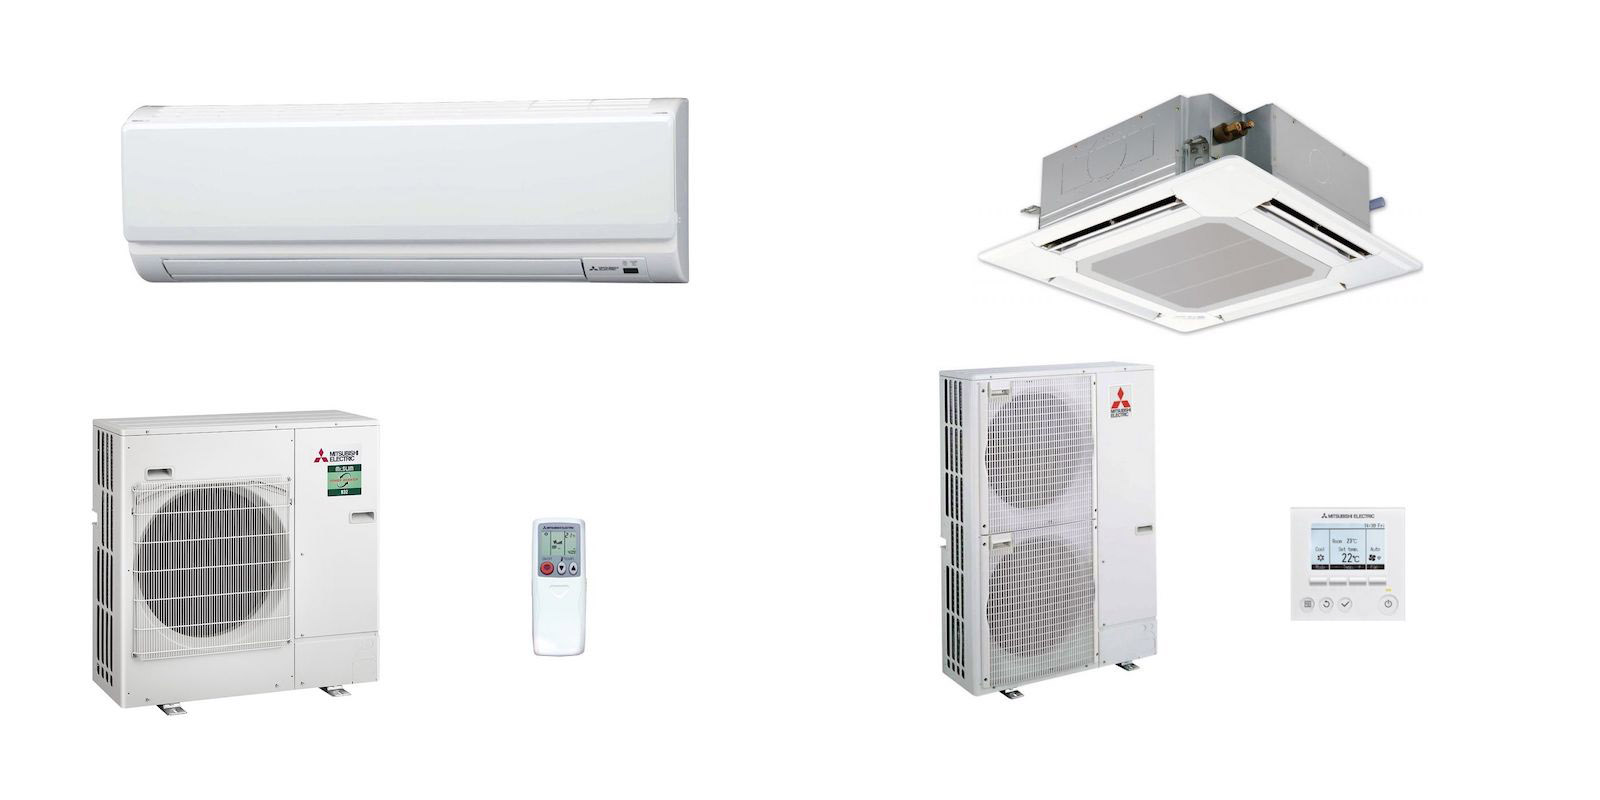 Mitsubishi Electric Mr Slim range, Mitsubishi Electric PLA-M50EA 4-Way Blow Ceiling Cassette Air Conditioning System